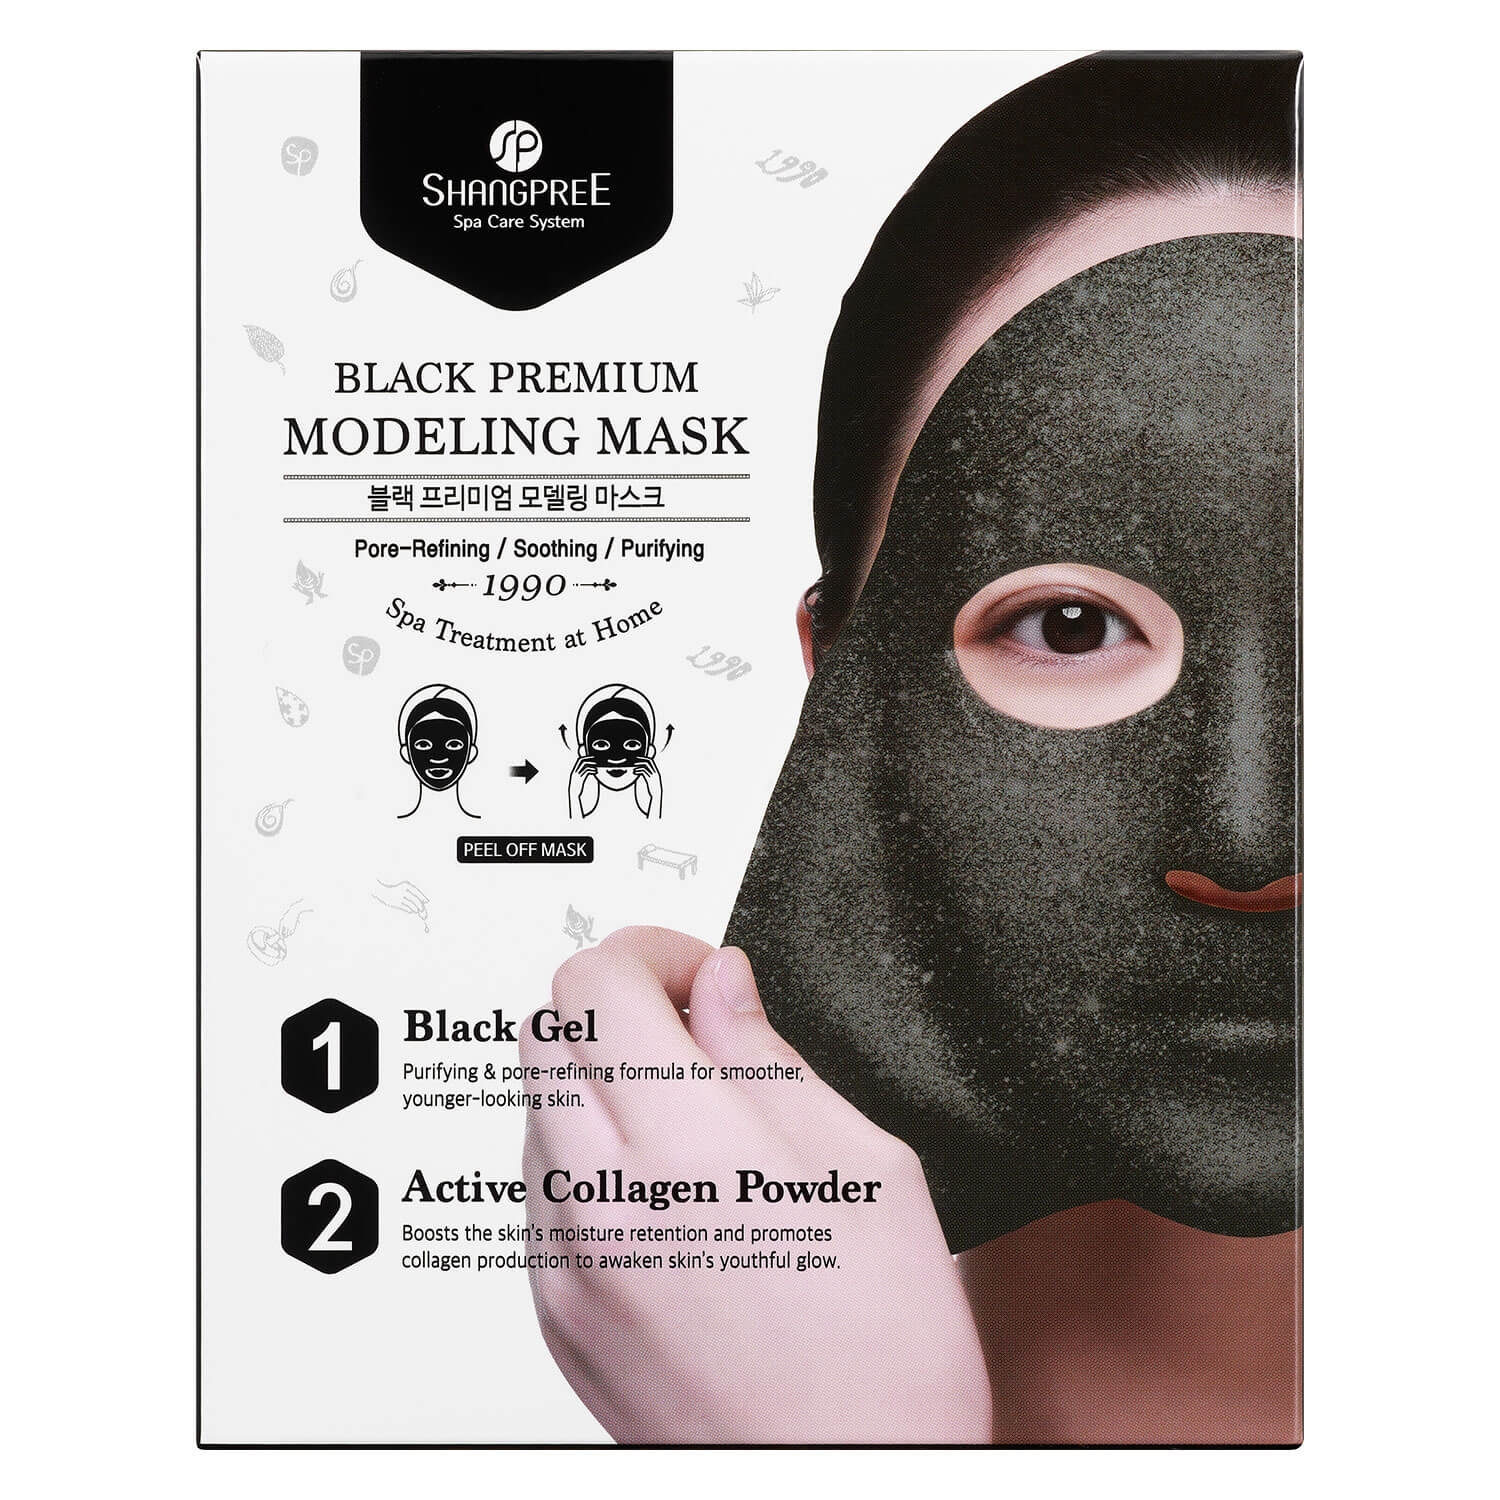 Product image from SHANGPREE - Black Premium Modeling Mask